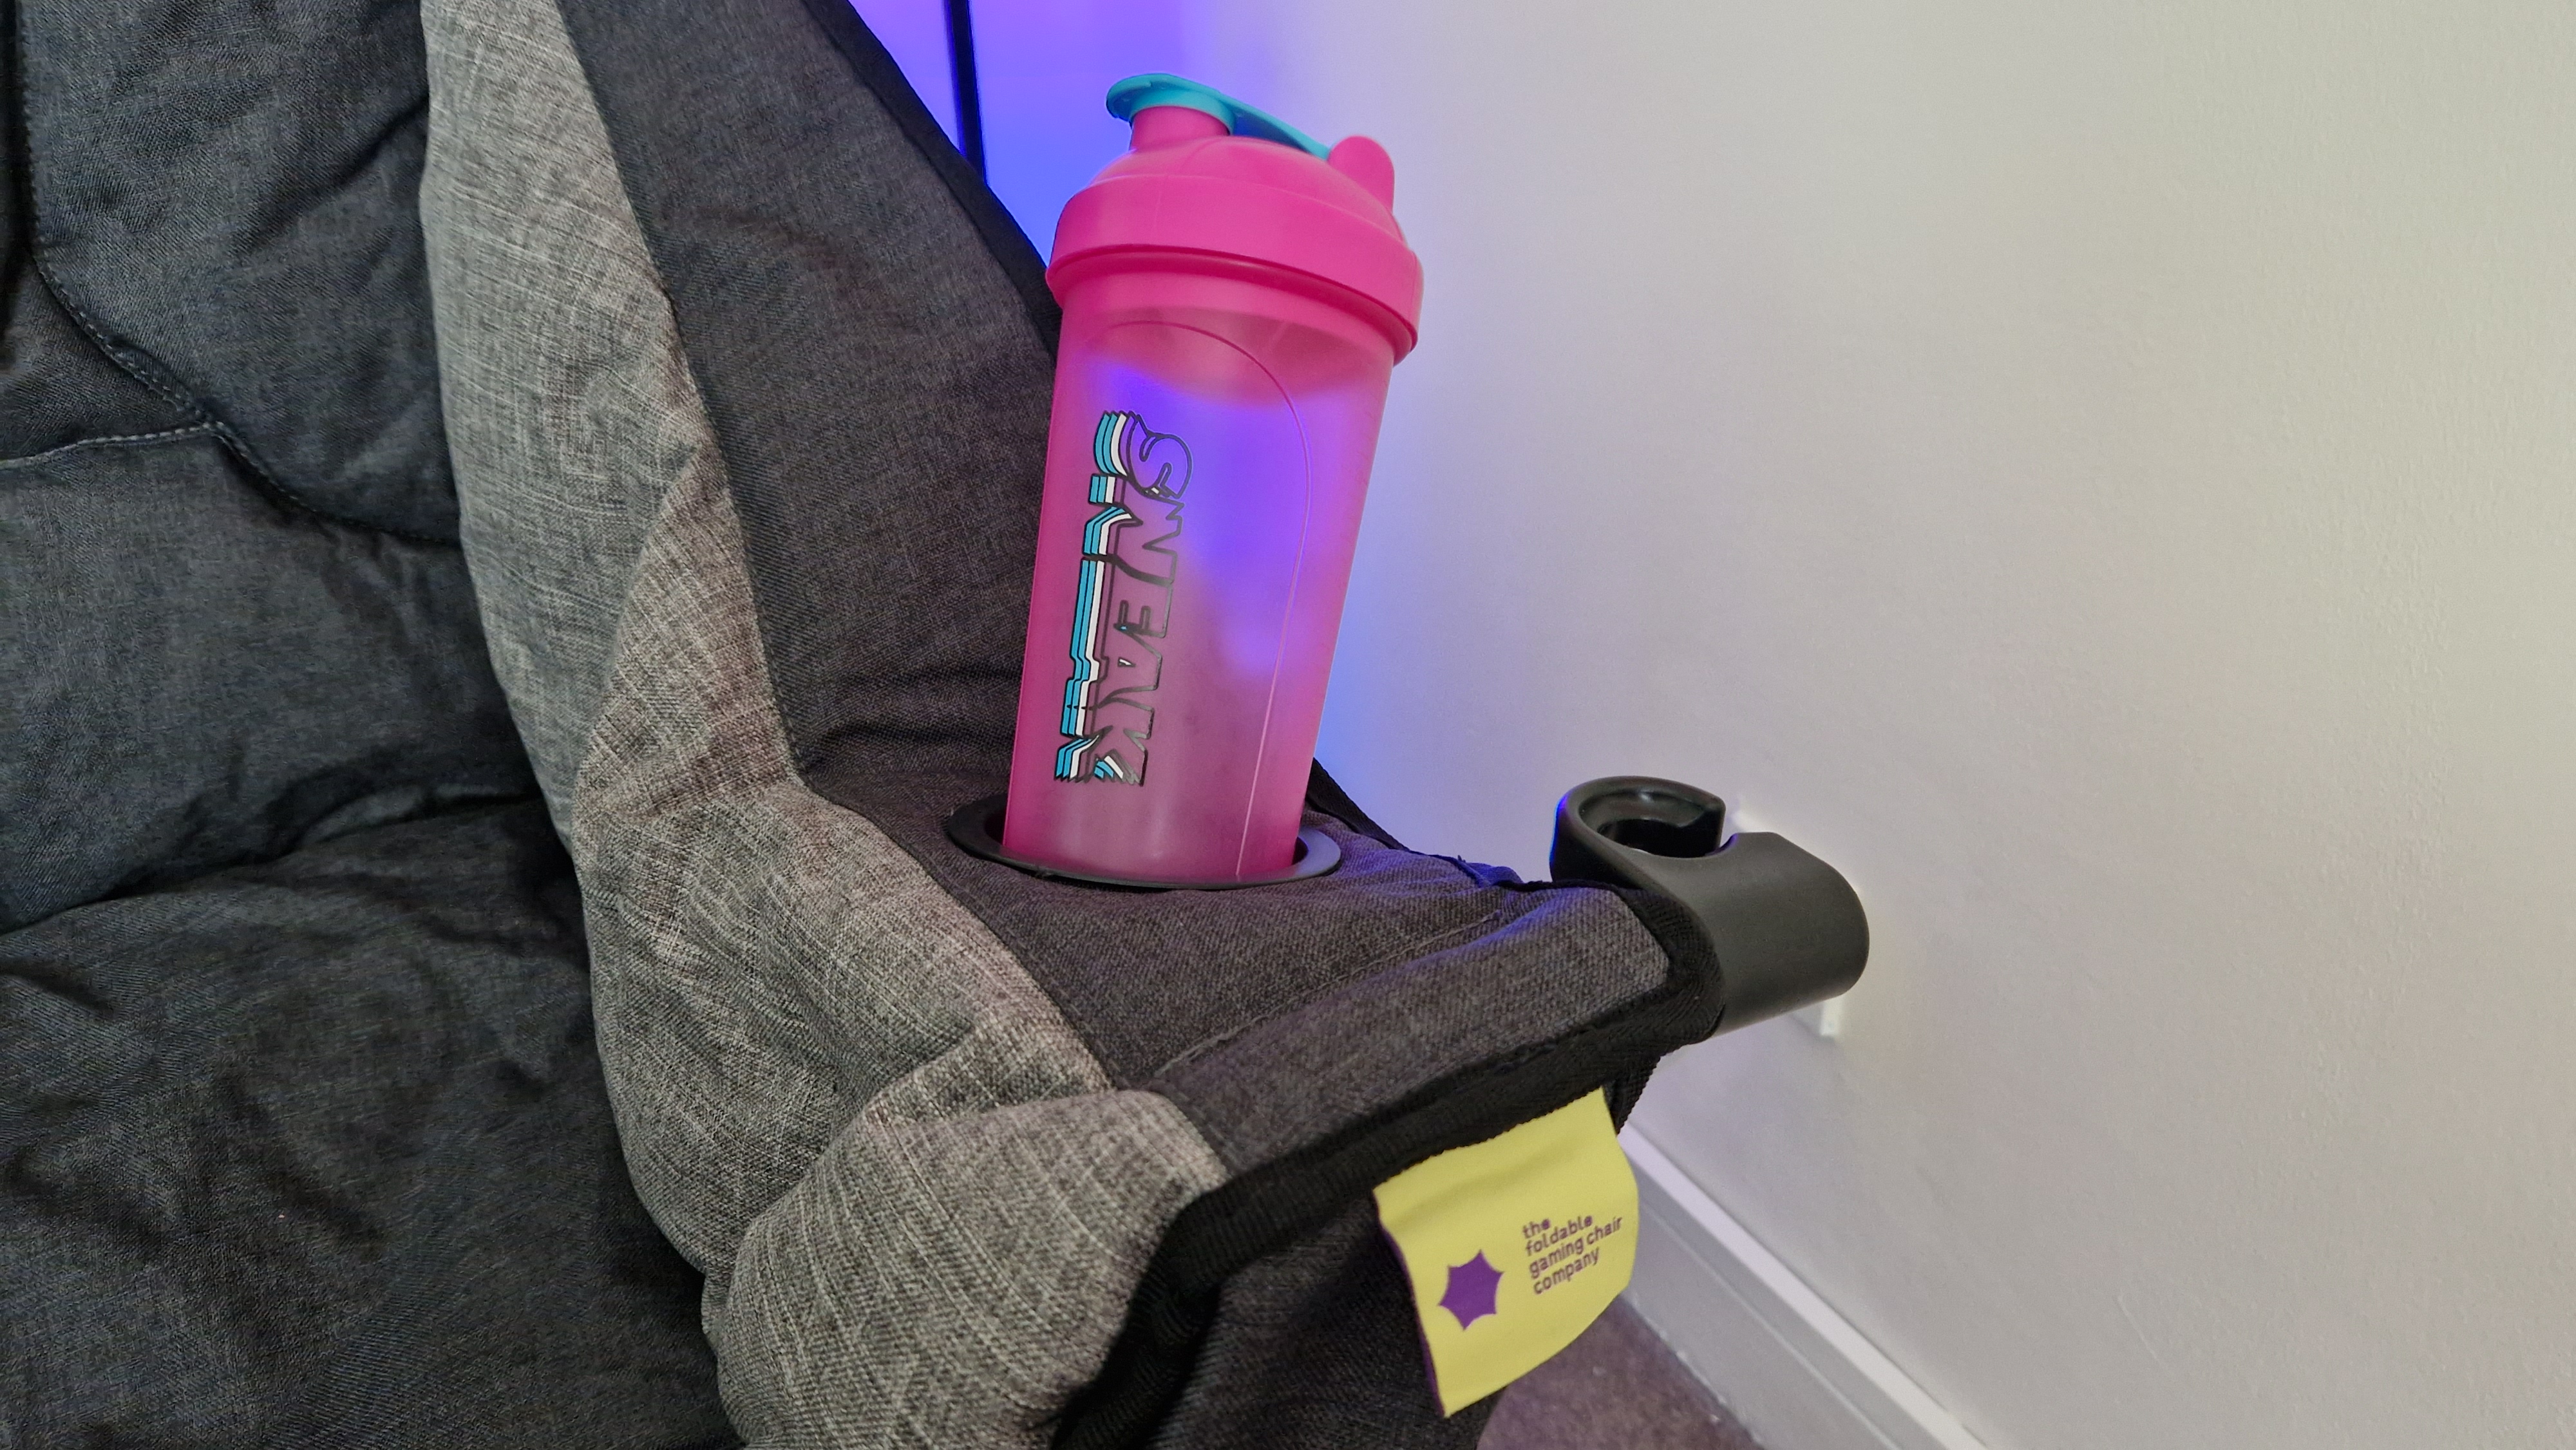 The Foldable Gaming Chair's cupholder, holding a Sneak Energy drink shaker